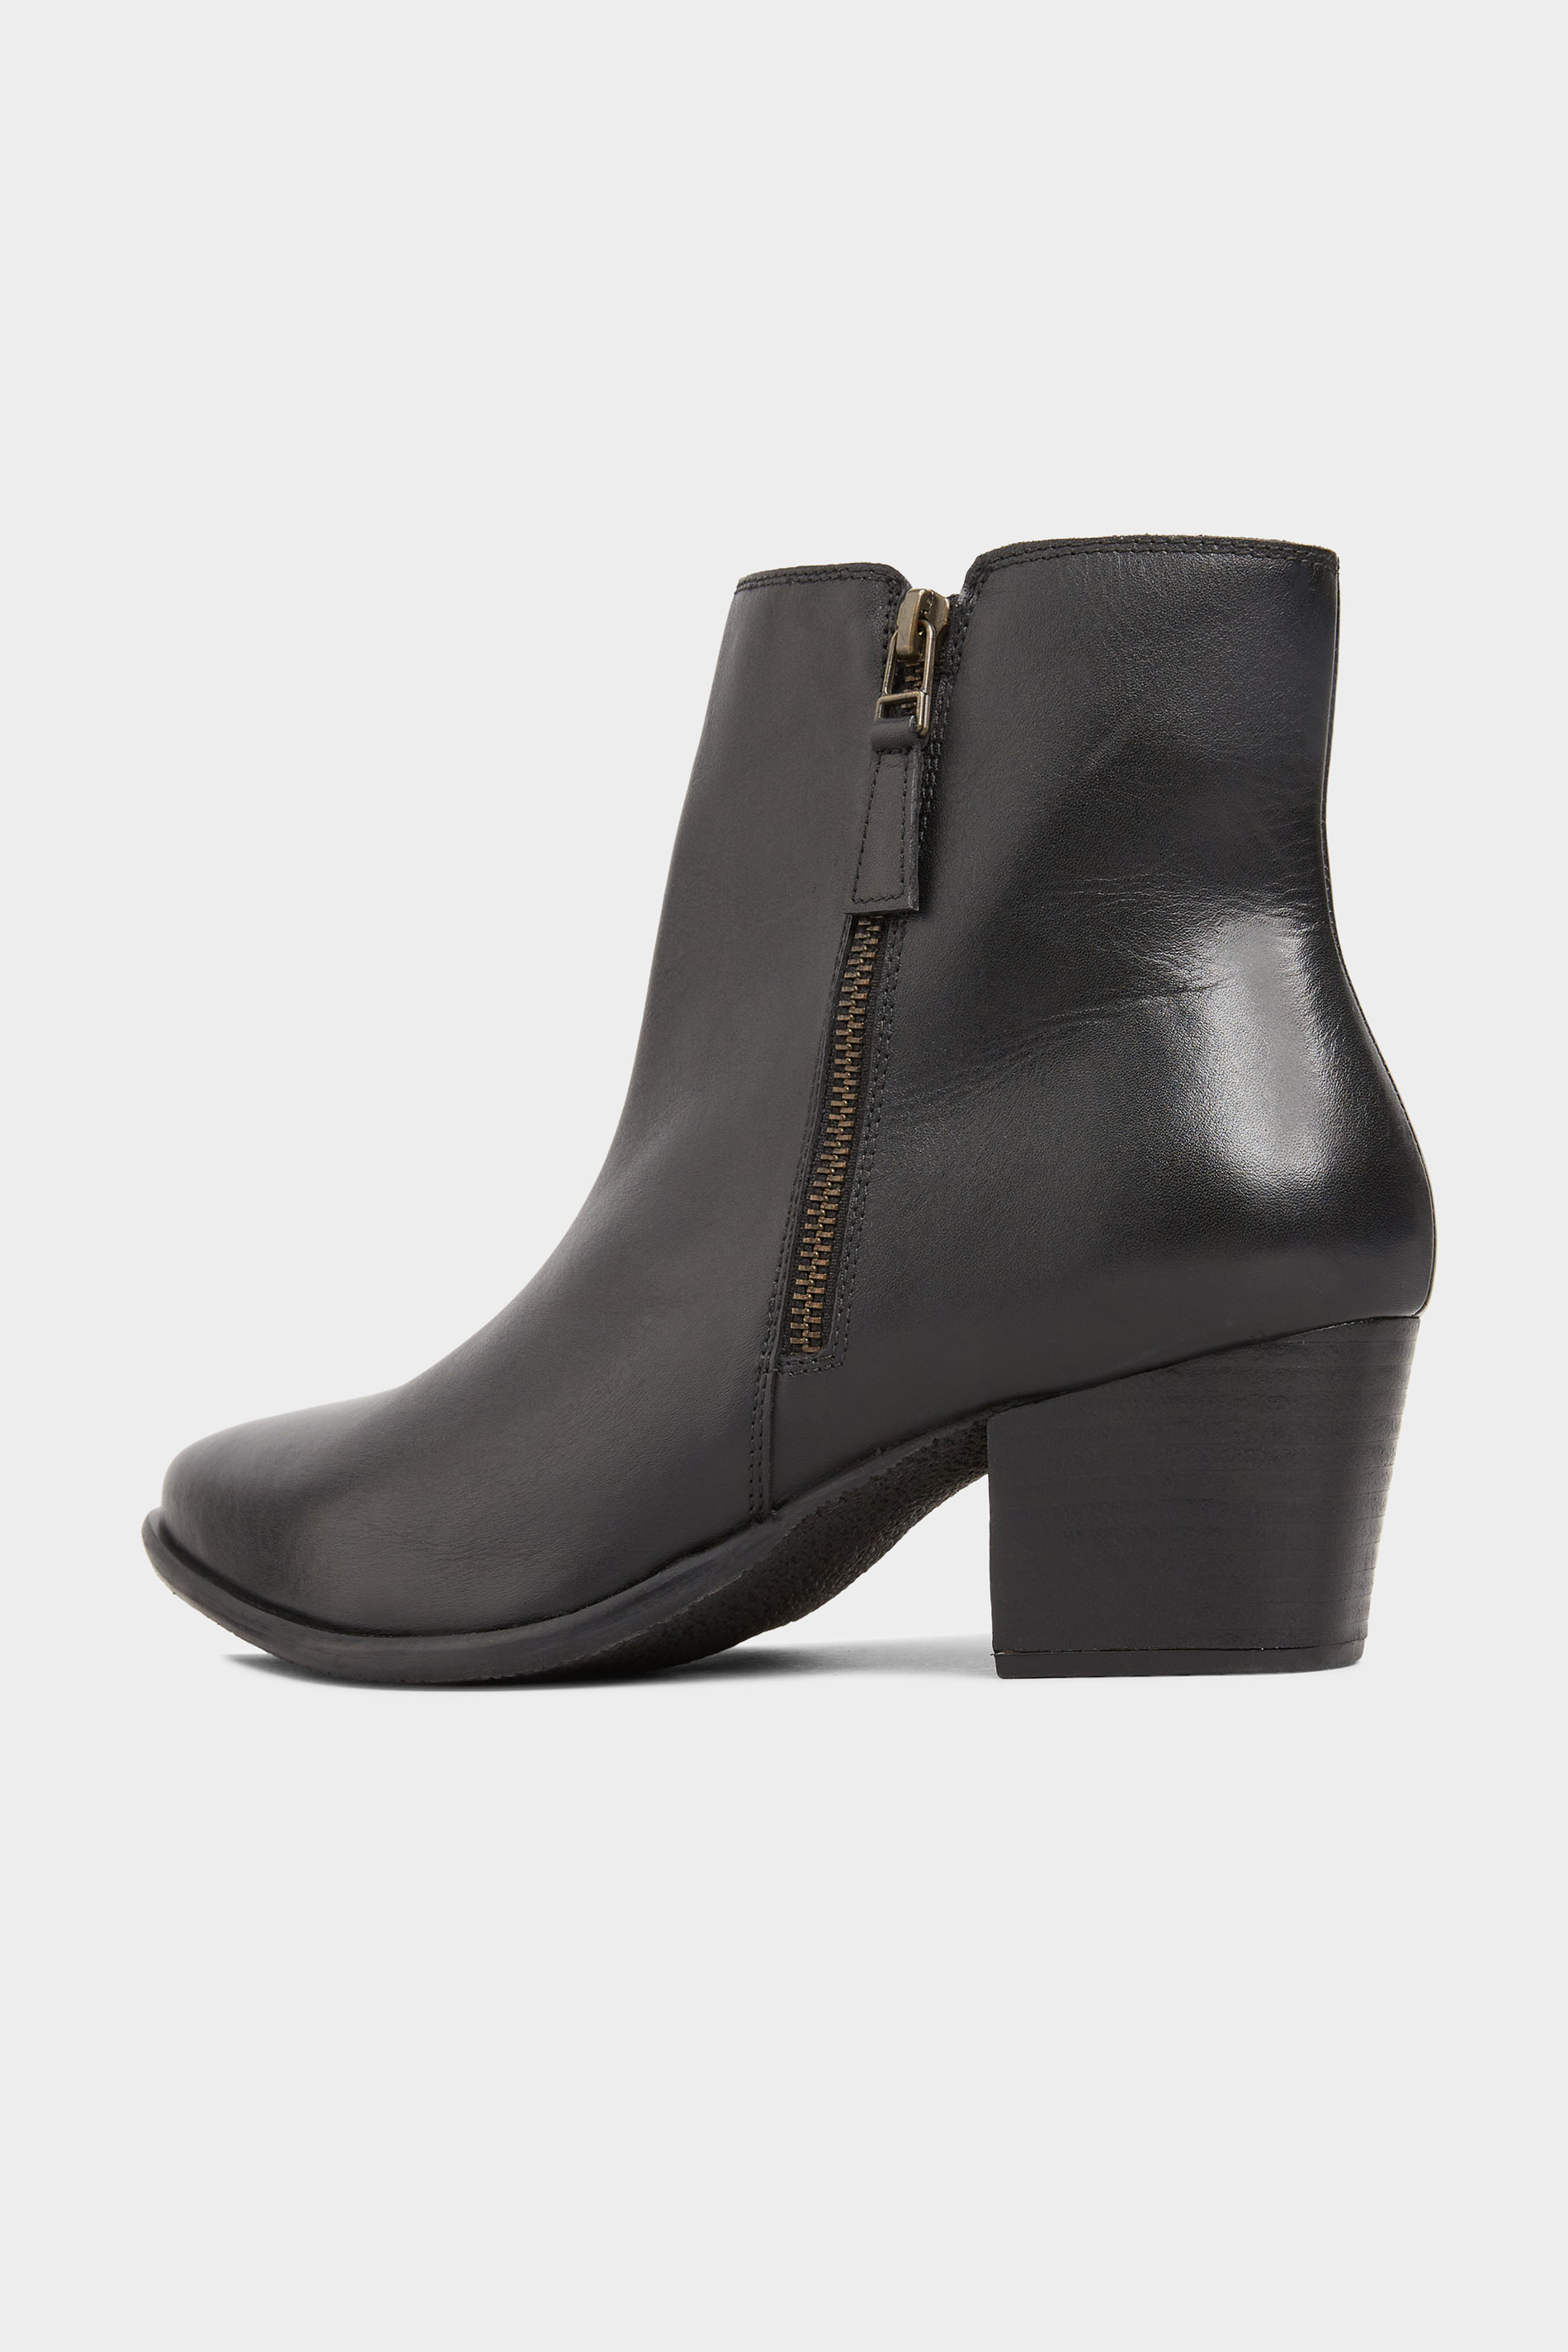 Black Leather Western Ankle Boots In Extra Wide Fit | Long Tall Sally